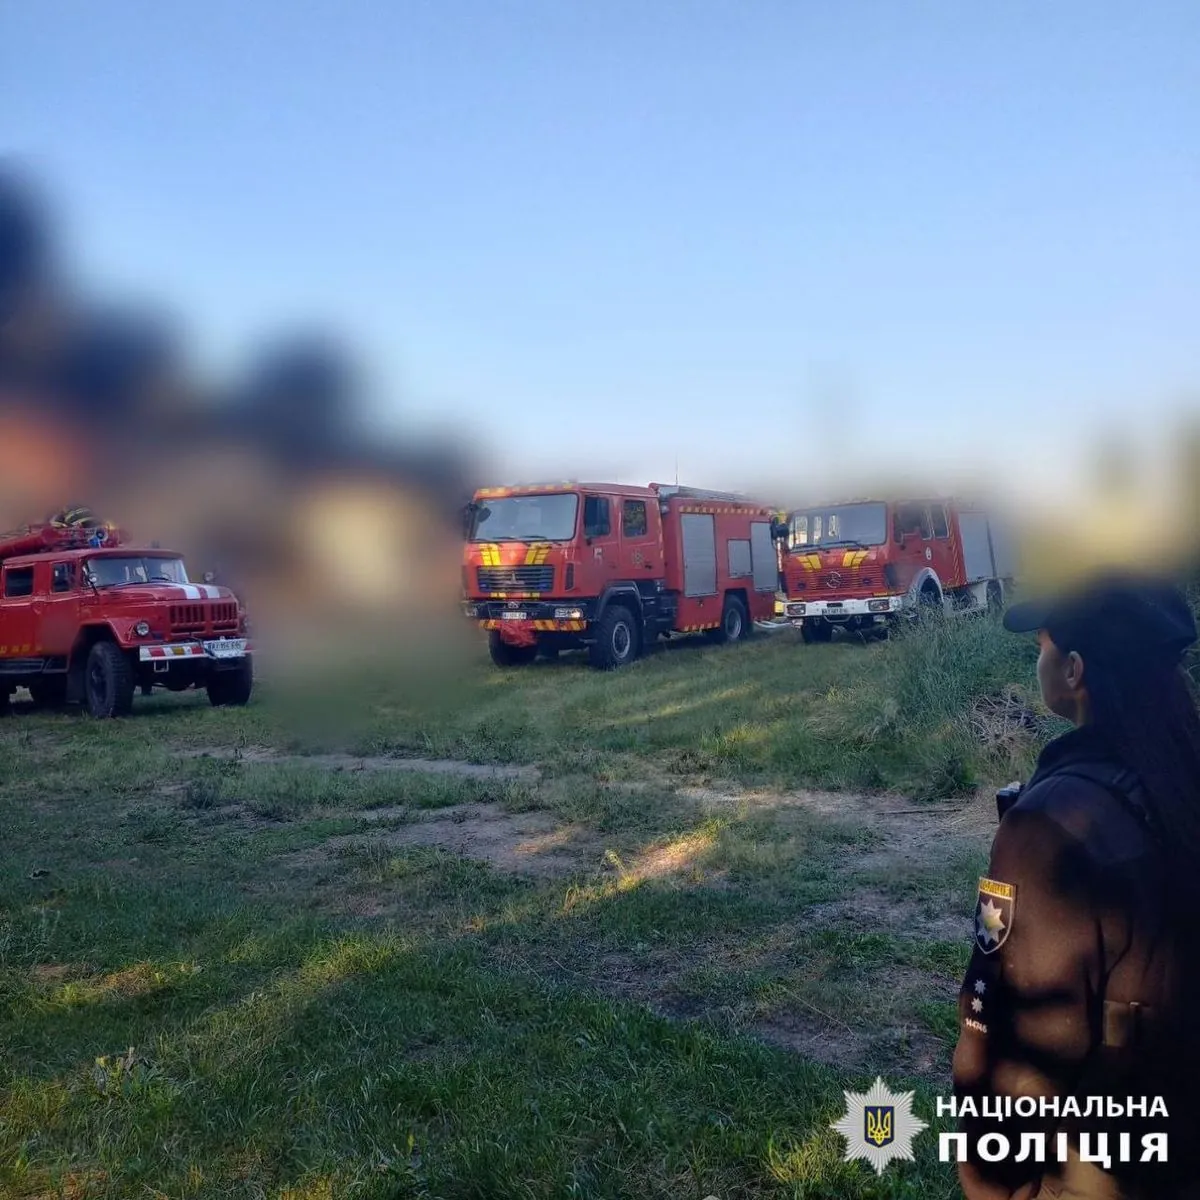 Russian attack in Kiev region: rescuers continue to eliminate a fire at an industrial facility